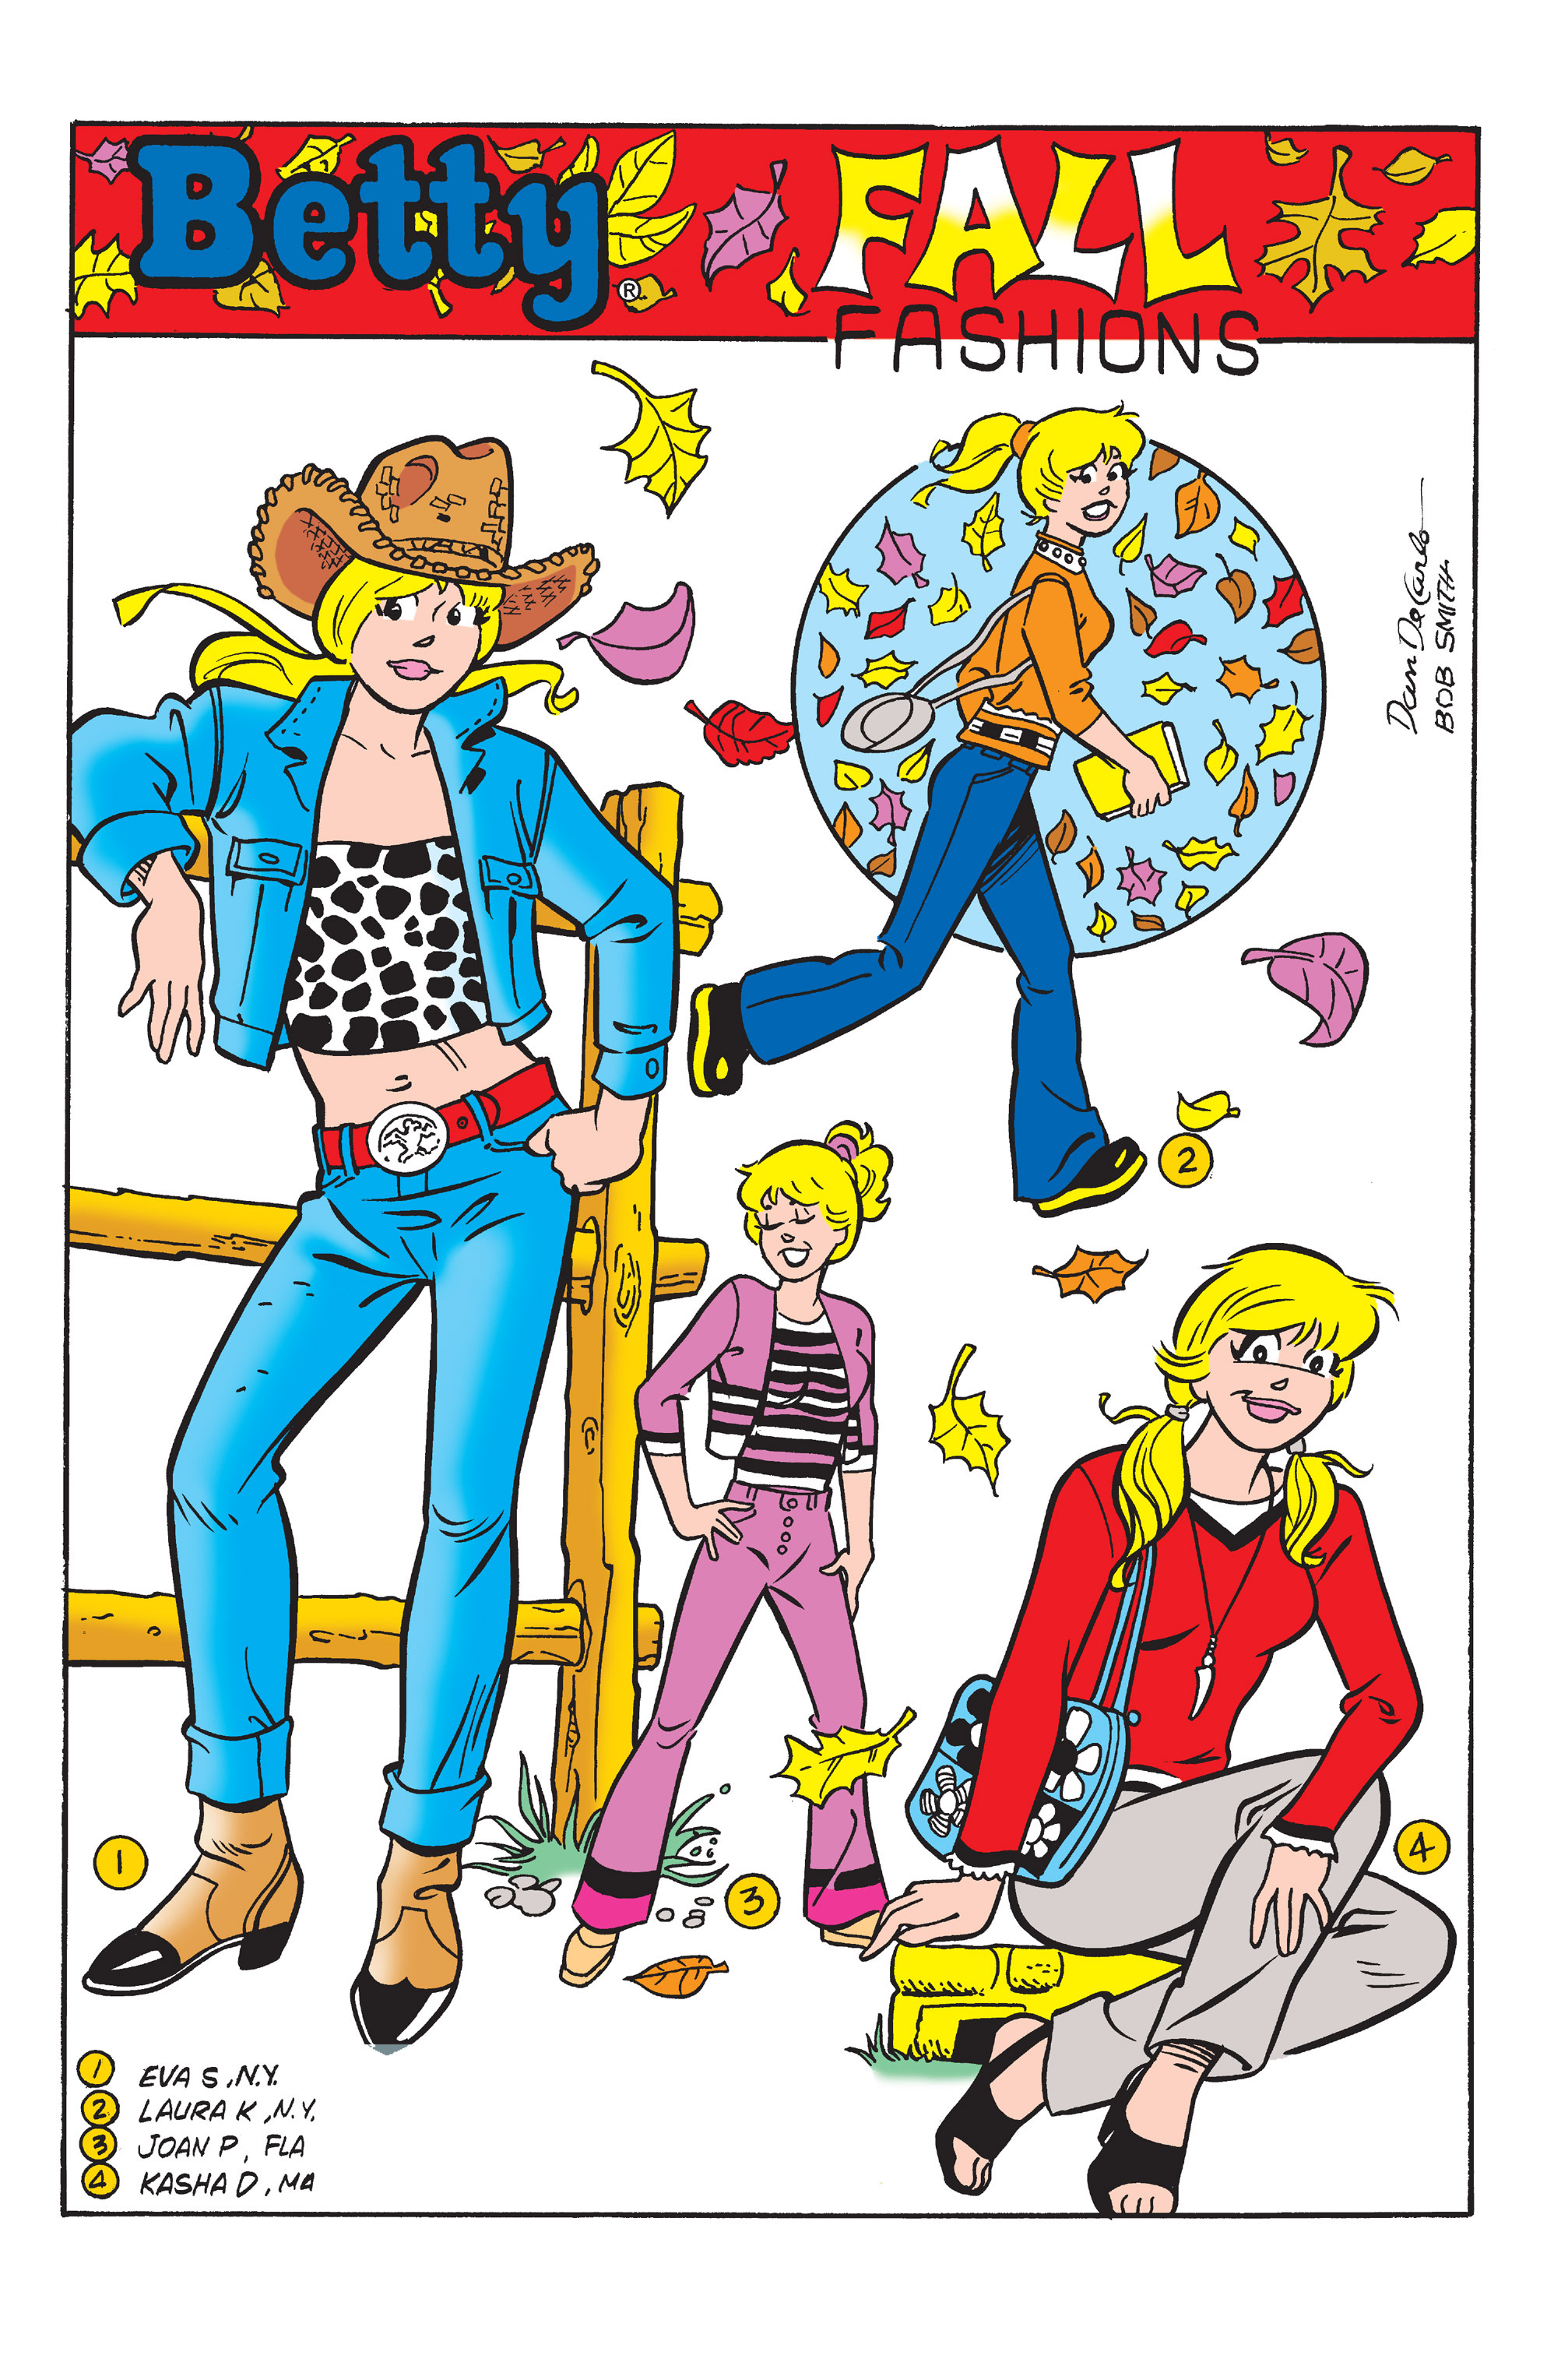 Read online Betty's Cool Fashions comic -  Issue # TPB - 29